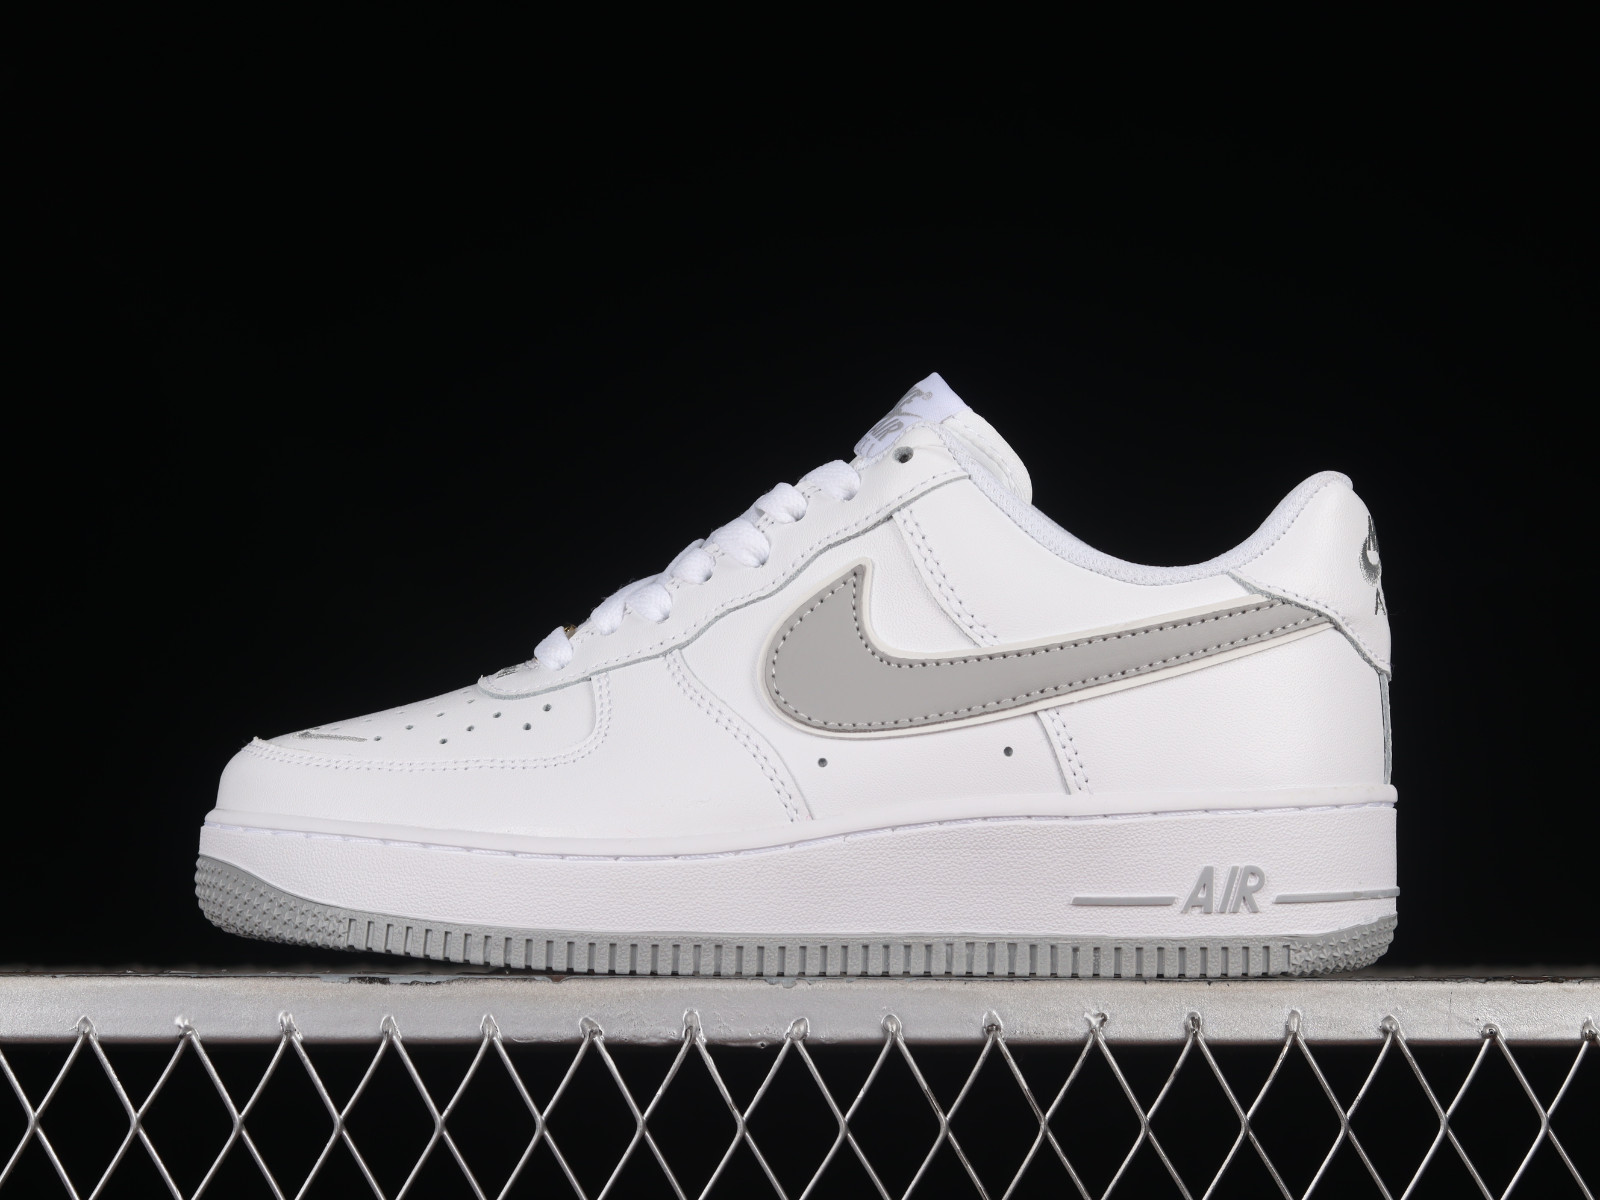 Nike Air Force 1 07 Low Swoosh White Grey CV5696 - MultiscaleconsultingShops nike shox r3 silver edition black sneakers - 961